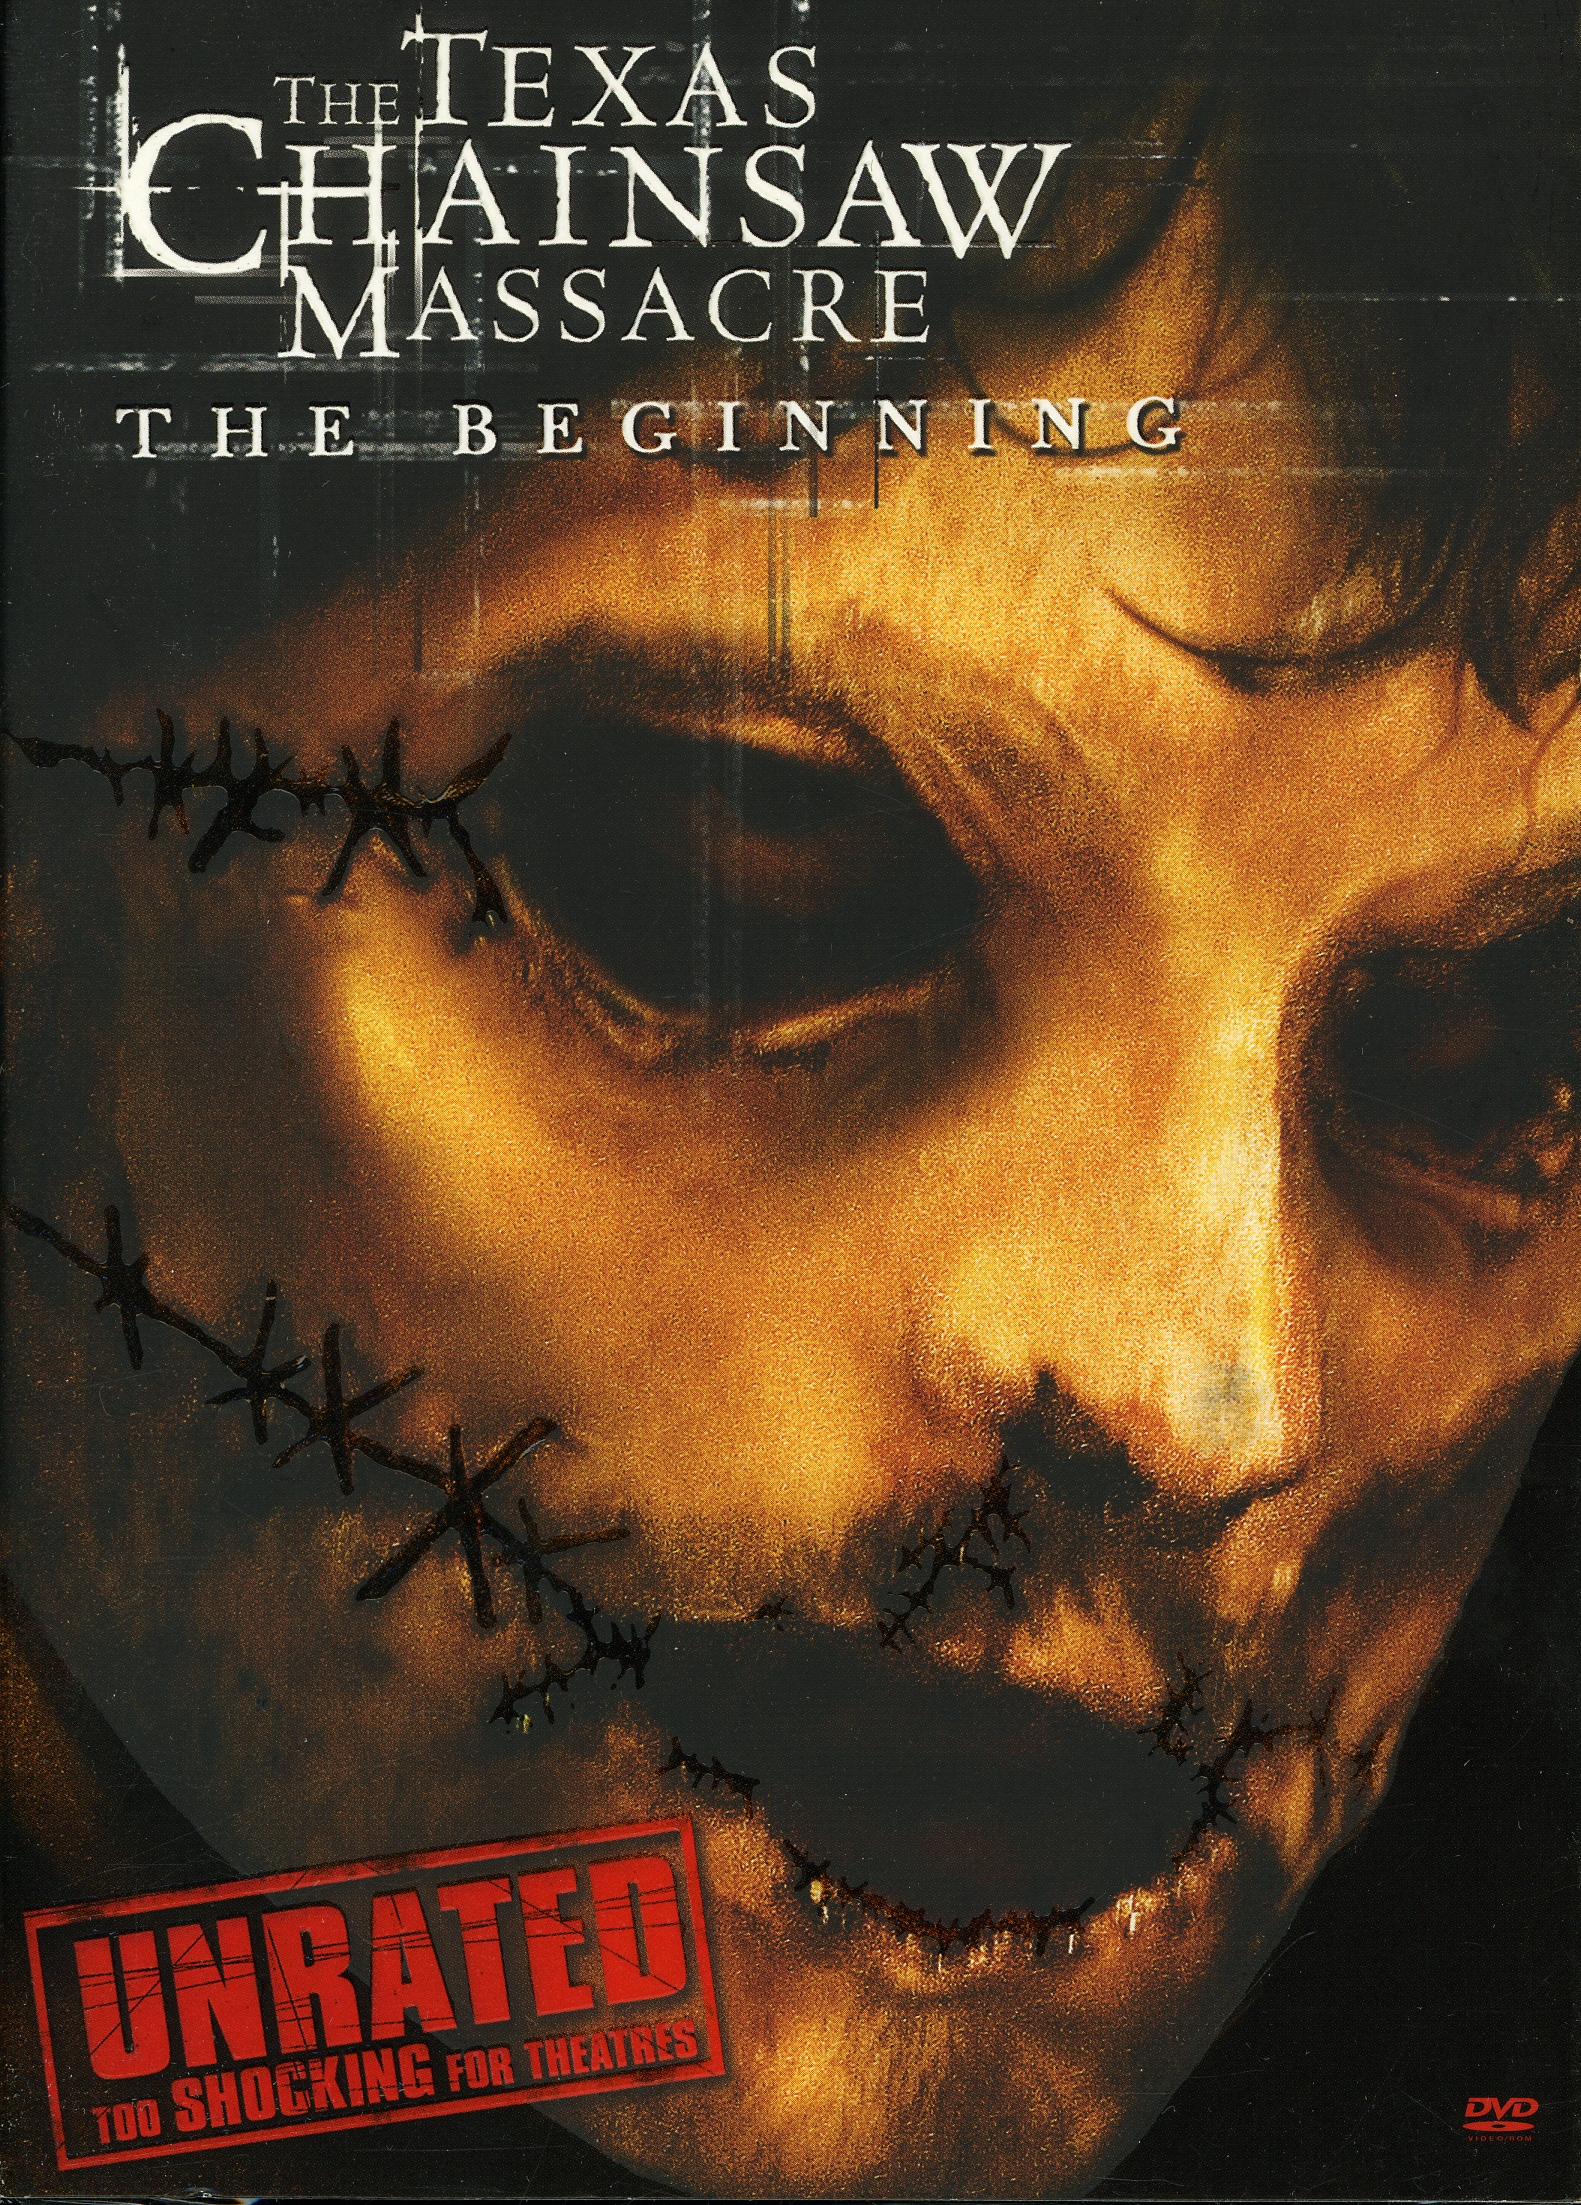 TEXAS CHAINSAW MASSACRE: THE BEGINNING (UNRATED)